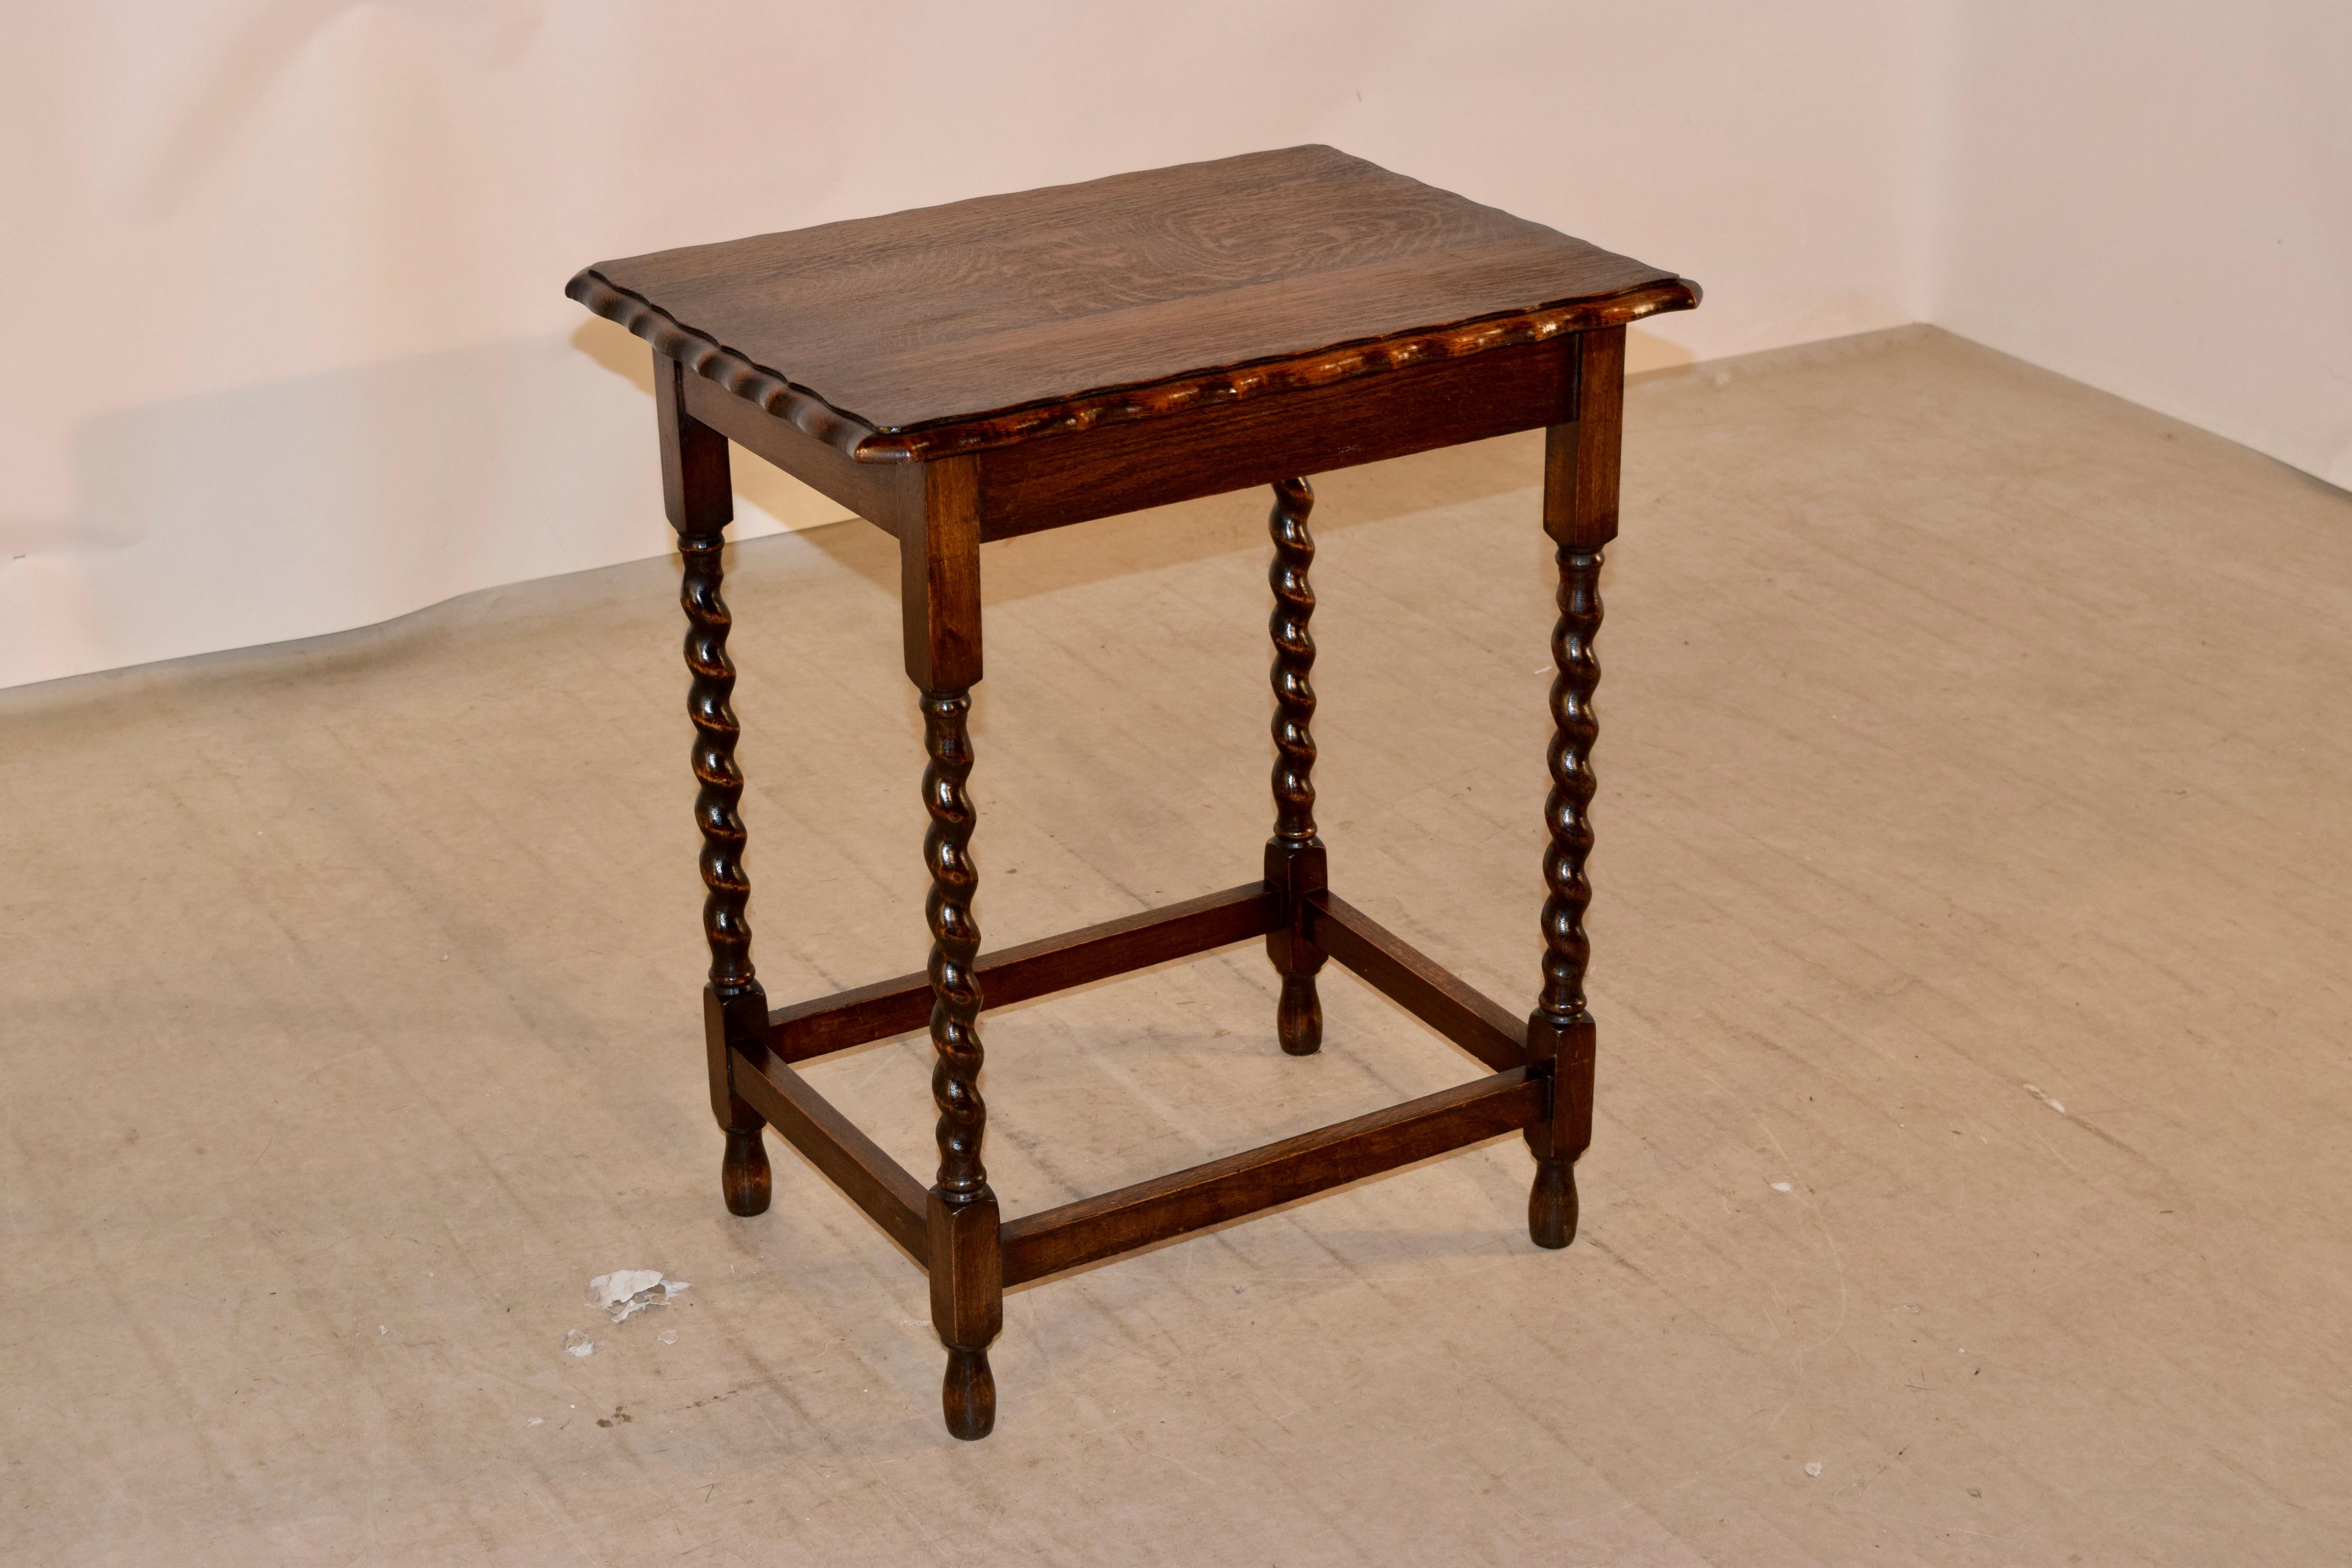 Oak side table from England with a scalloped and bevelled edge around the top following down to a simple apron and supported on hand turned barley twist legs, joined by simple stretchers and raised on hand turned feet.